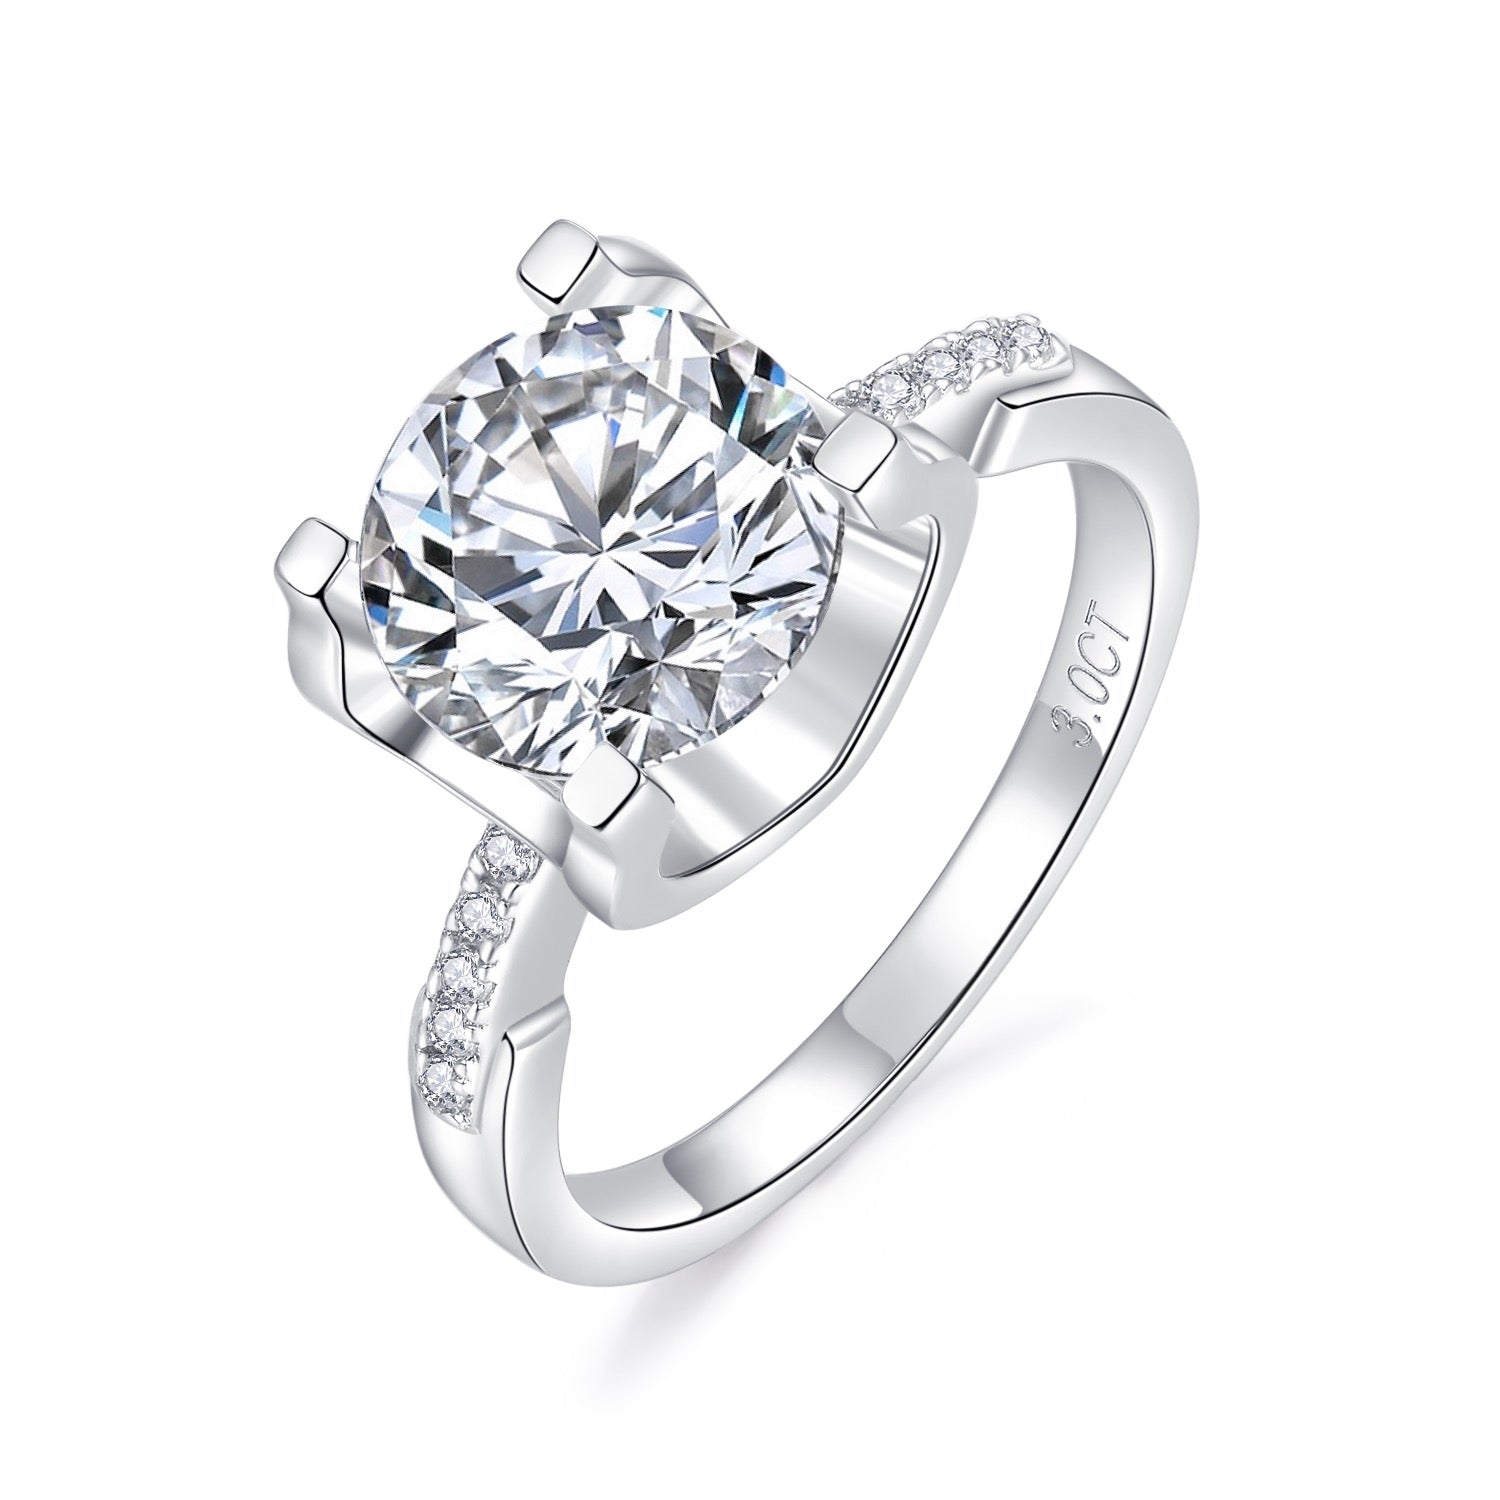 No.2 RM1002 0.5/1.0/2.0/3.0 CTW Signature Brilliant Round Cut 6A Moissanite 18K S925 Band Ring V shape 4 tab Prong High Profile with Side stones Accent